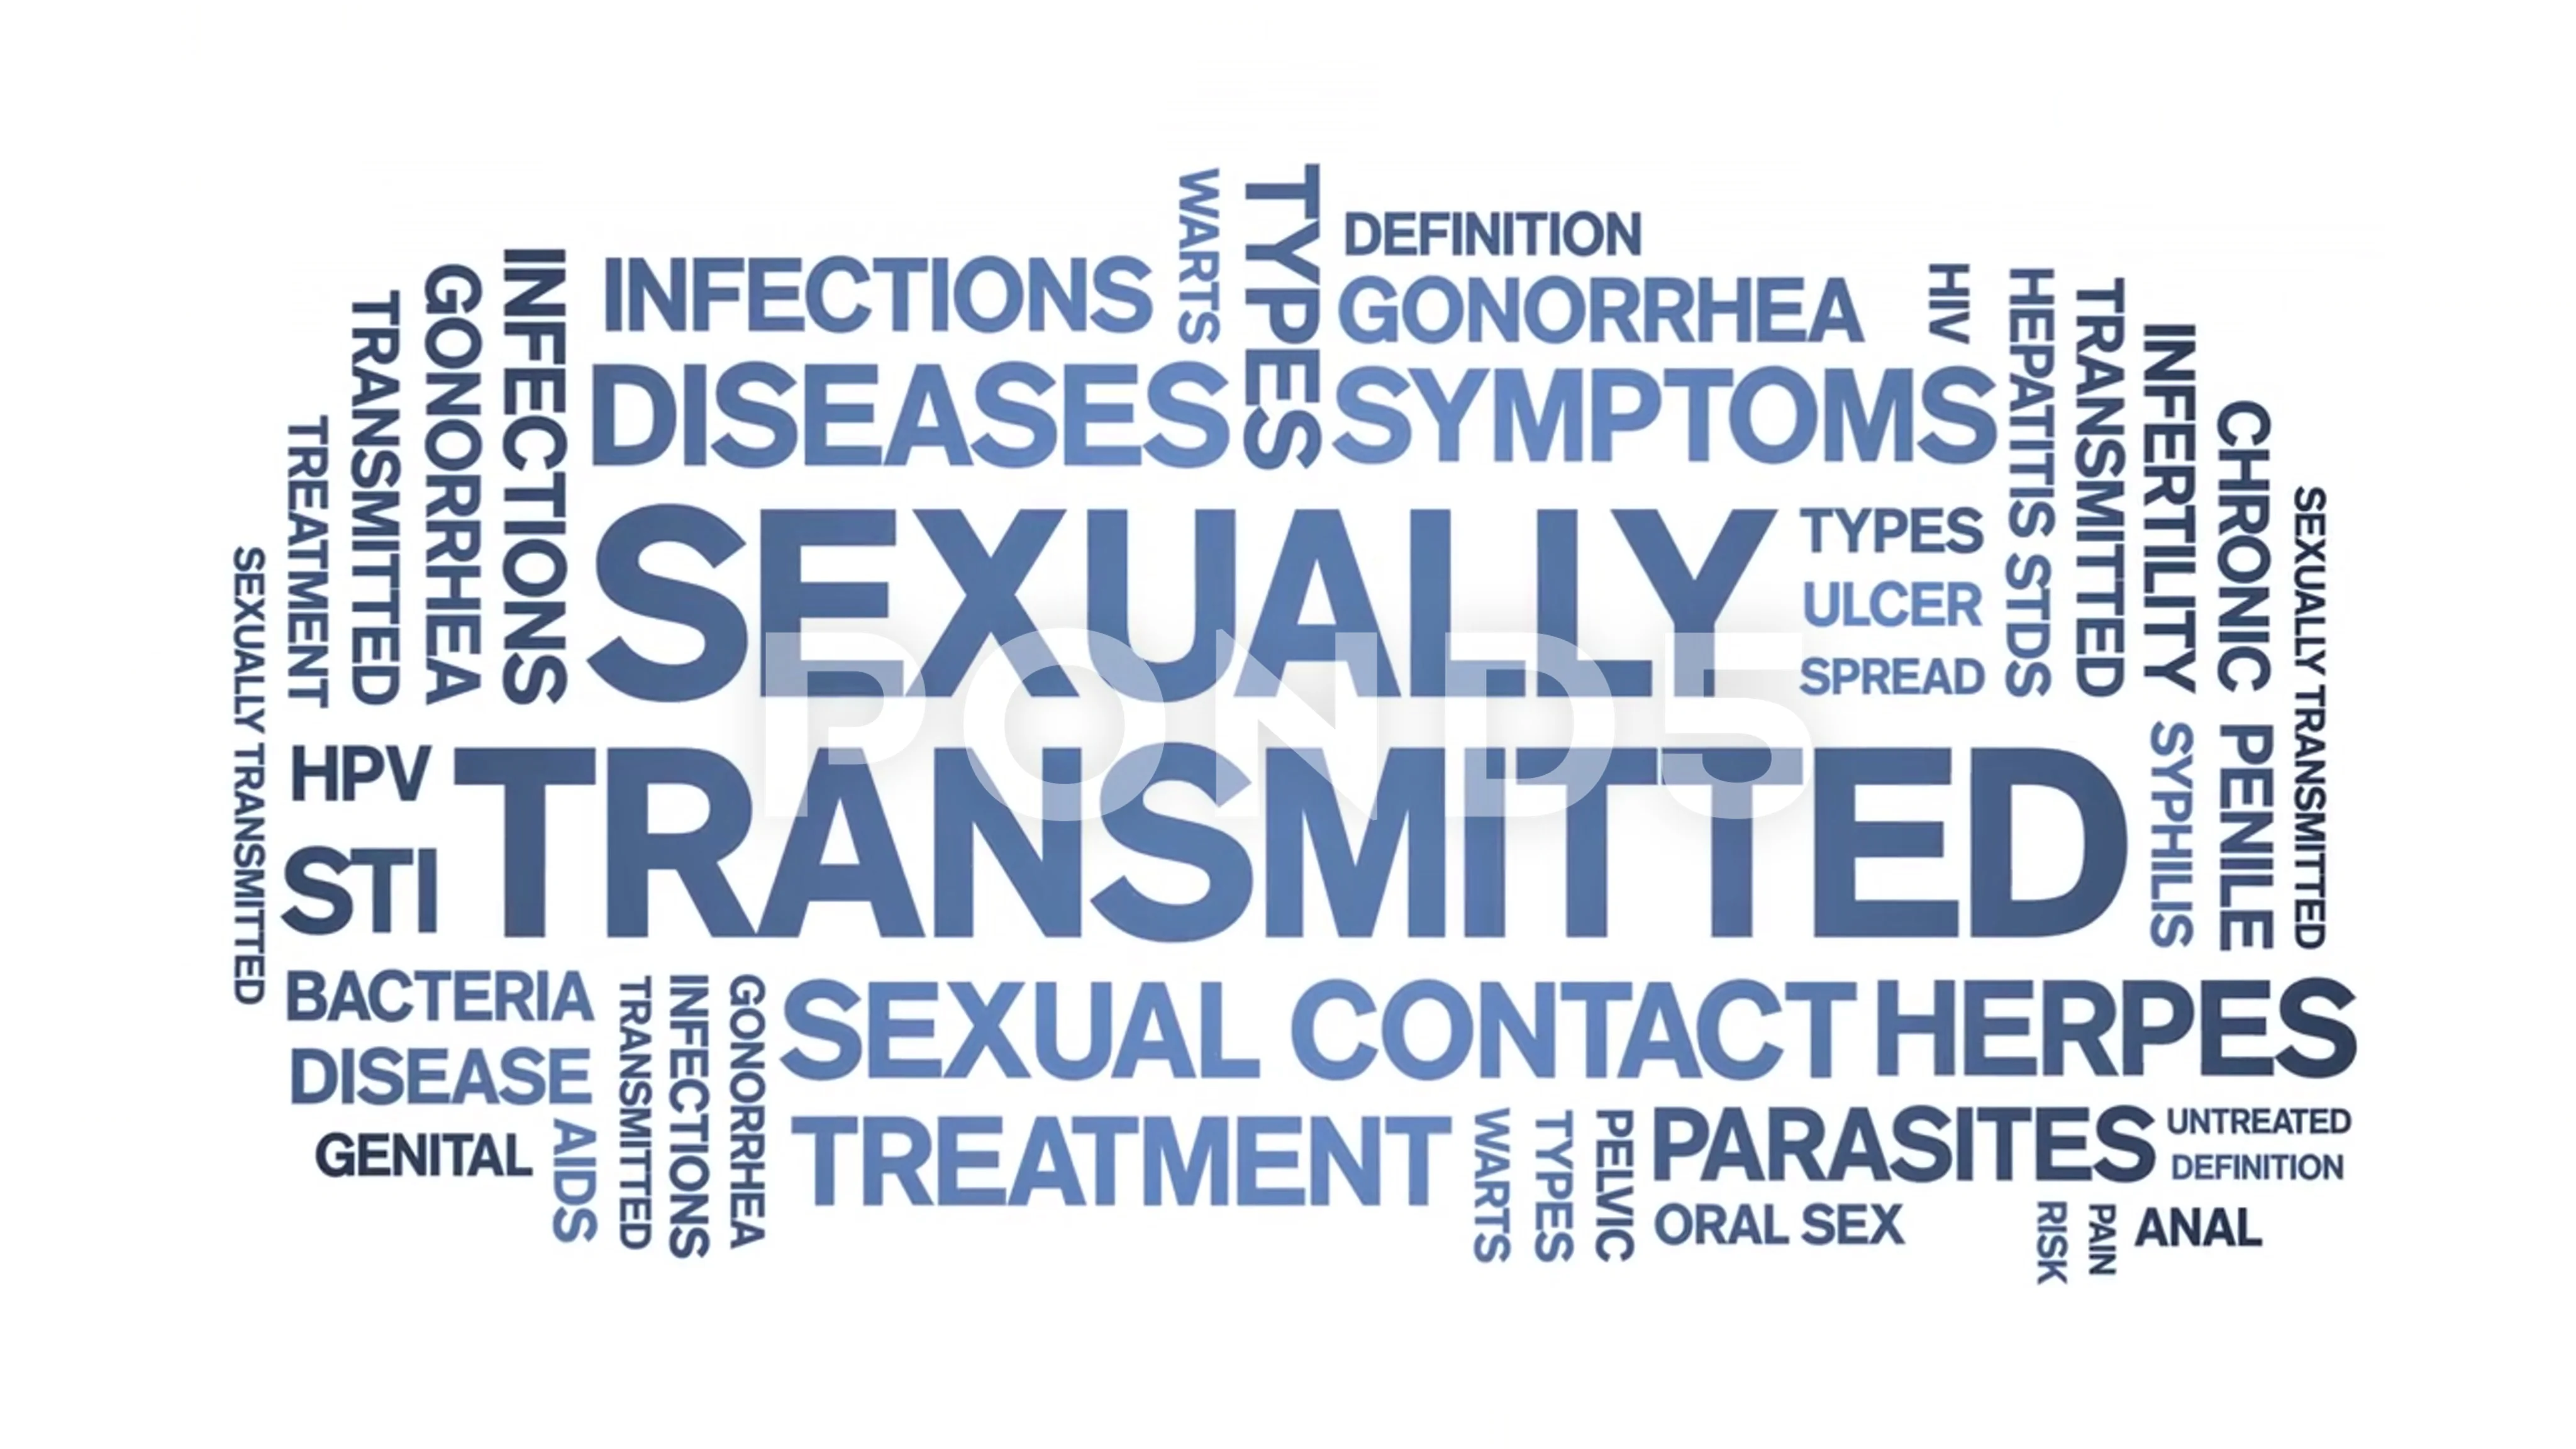 Sexually Transmitted animated word cloud, Stock Video